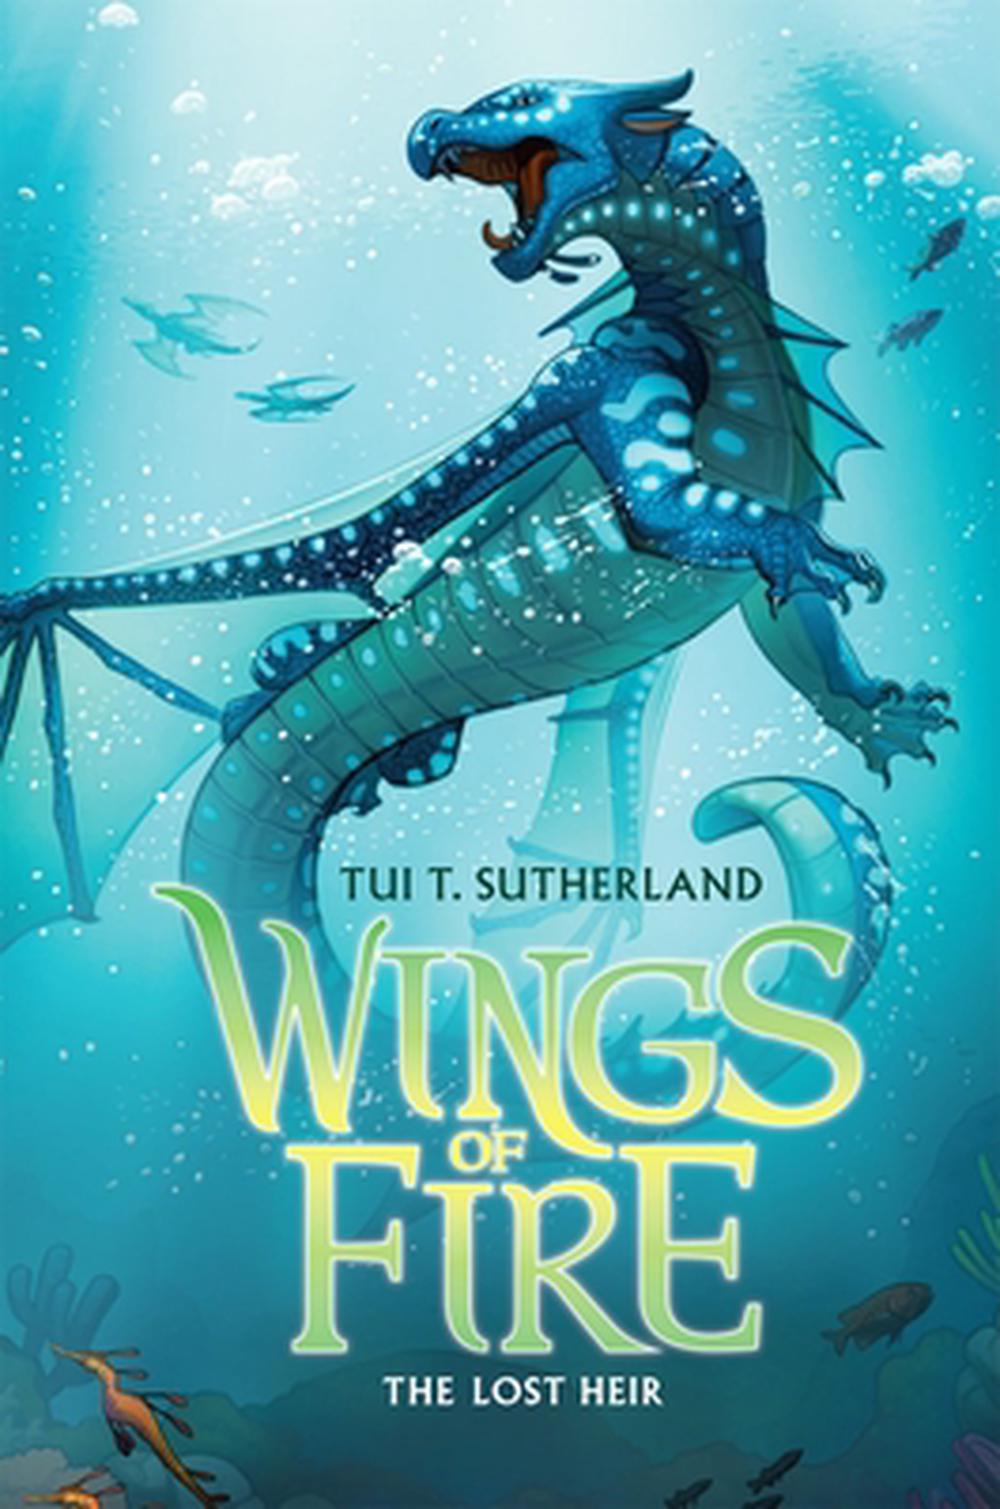 write the book review of wings of fire